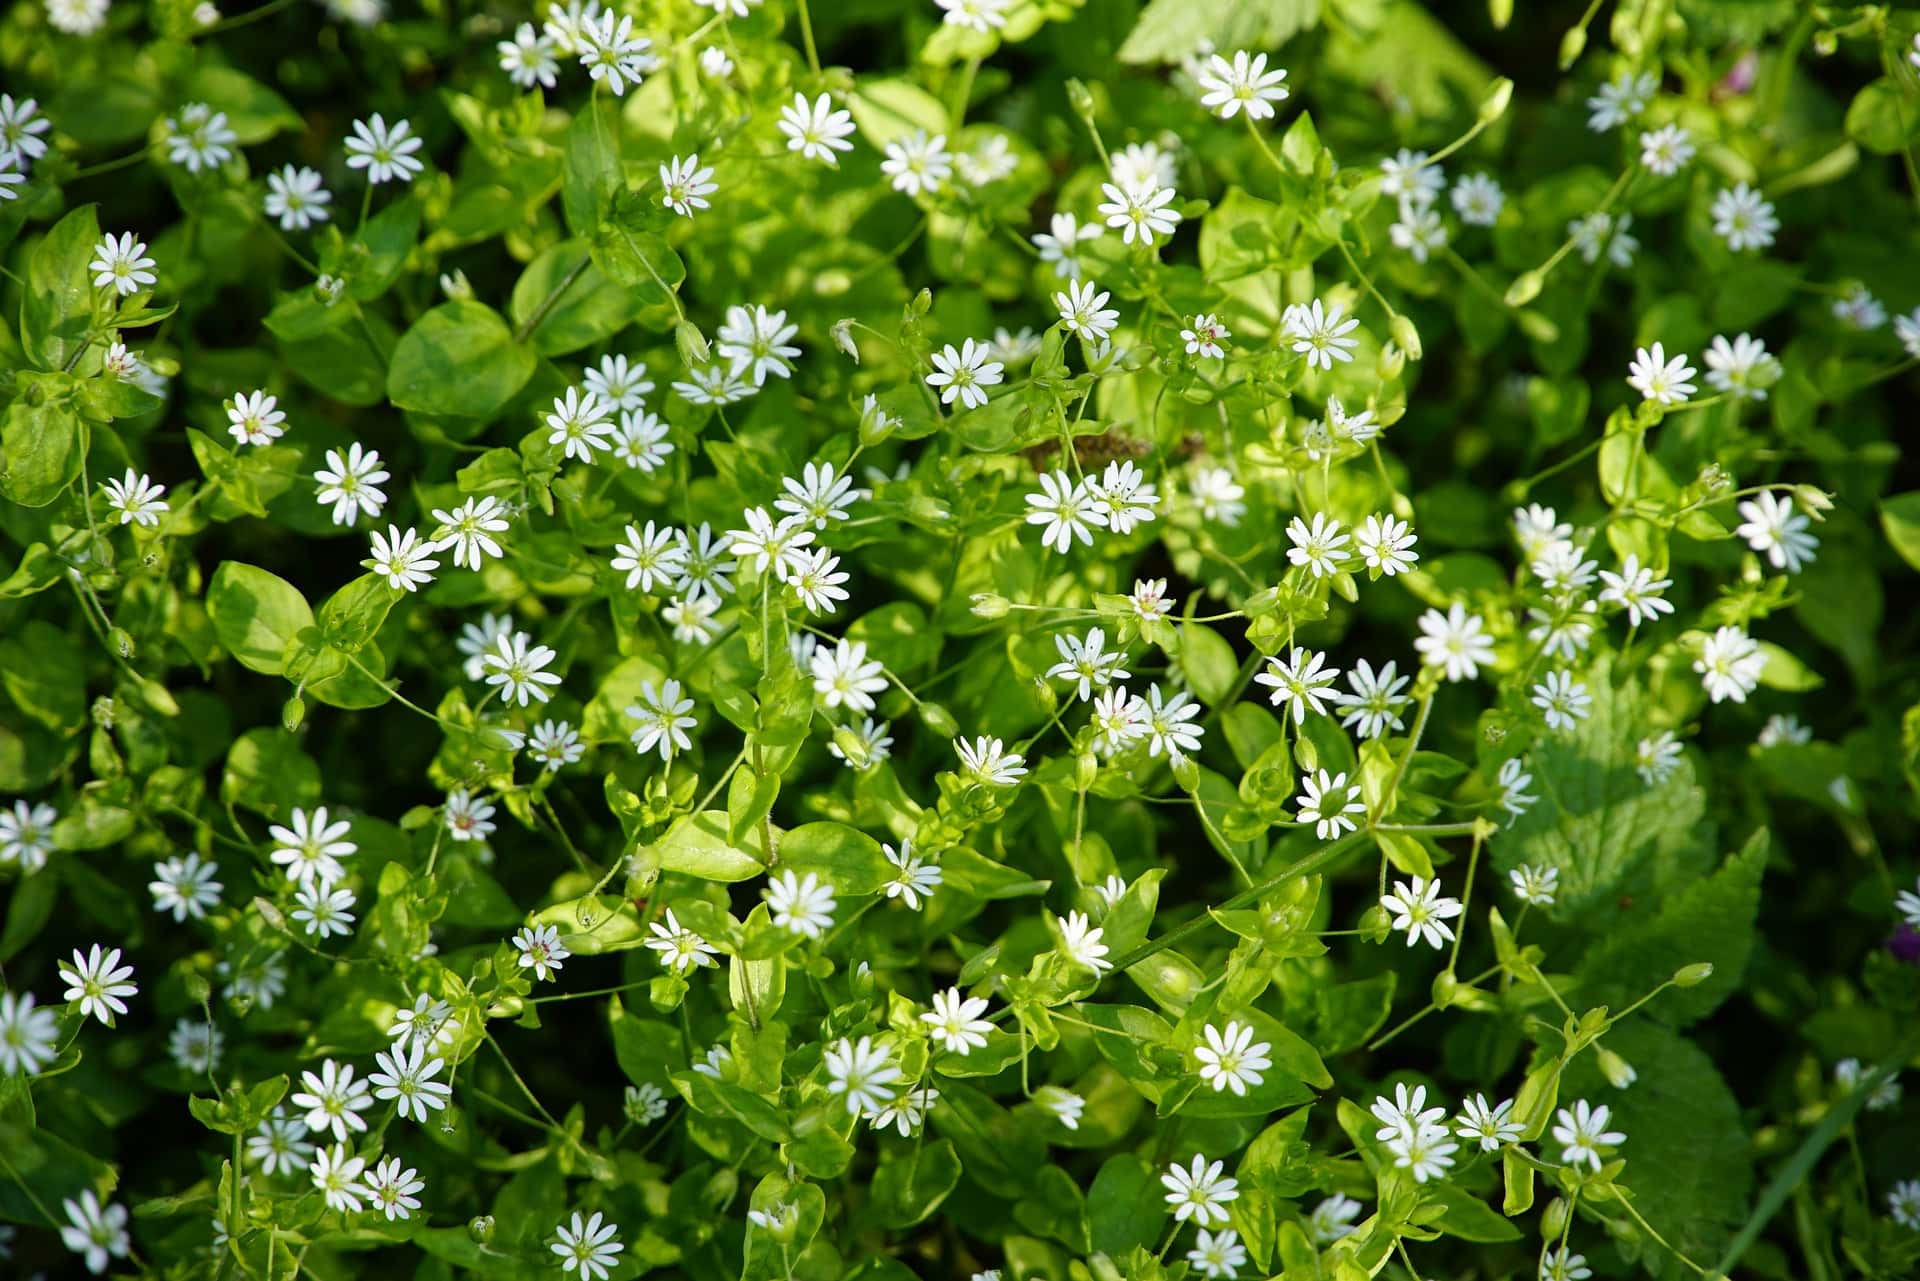 little white chickweed flowers and the green leaves